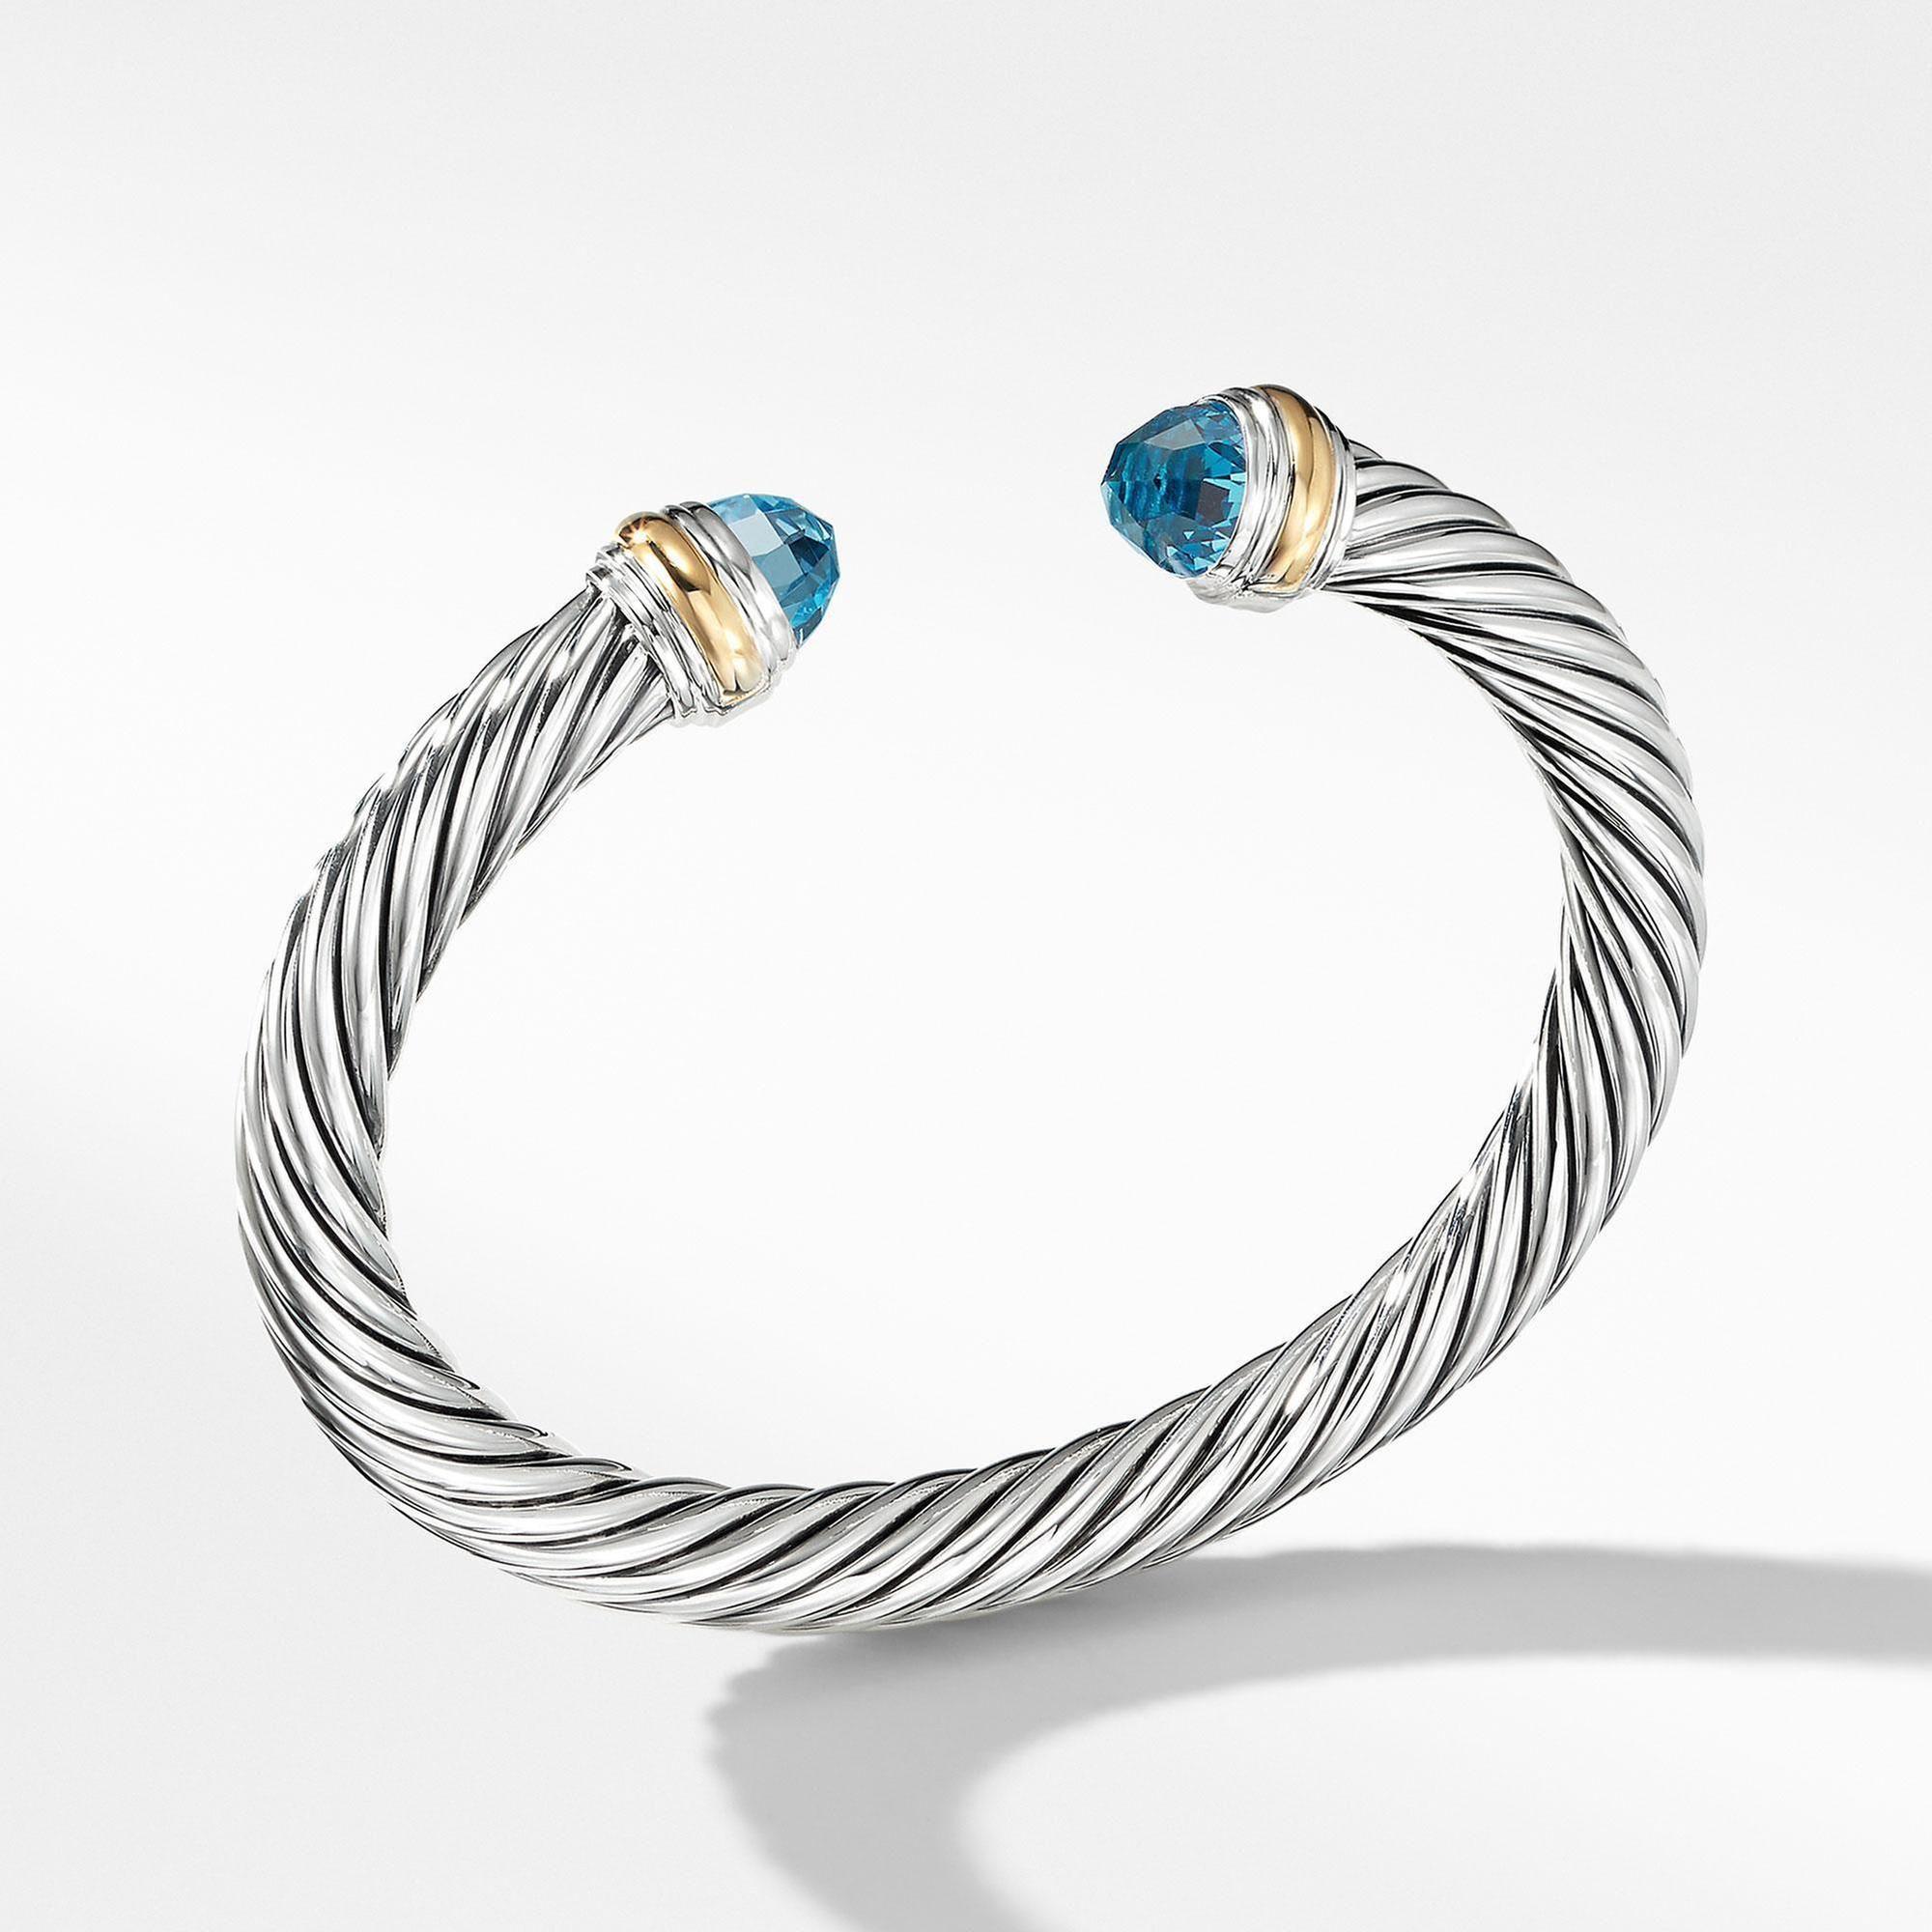 David Yurman Cable Classics Bracelet in Sterling Silver with Blue Topaz and 14K Yellow Gold - Extra Large -  B04425 S4ABTXL